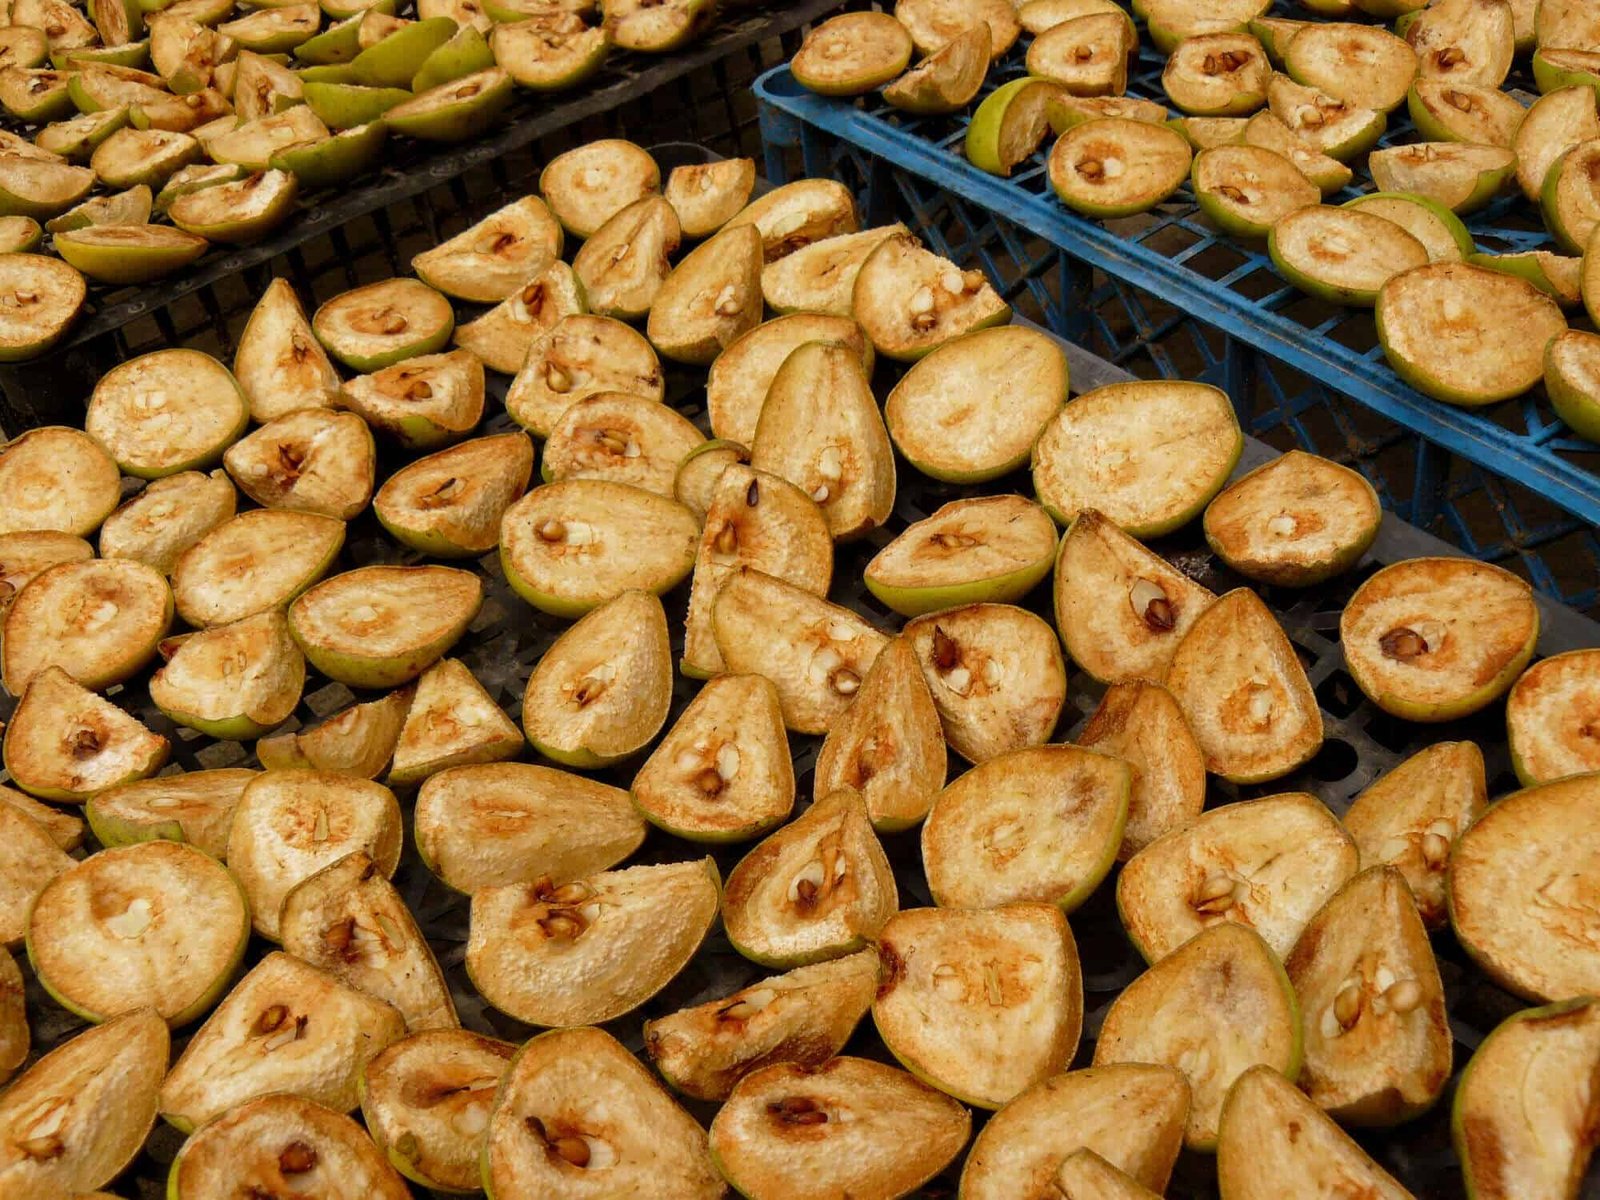 dehydrated pears on trays completed dehydrating process